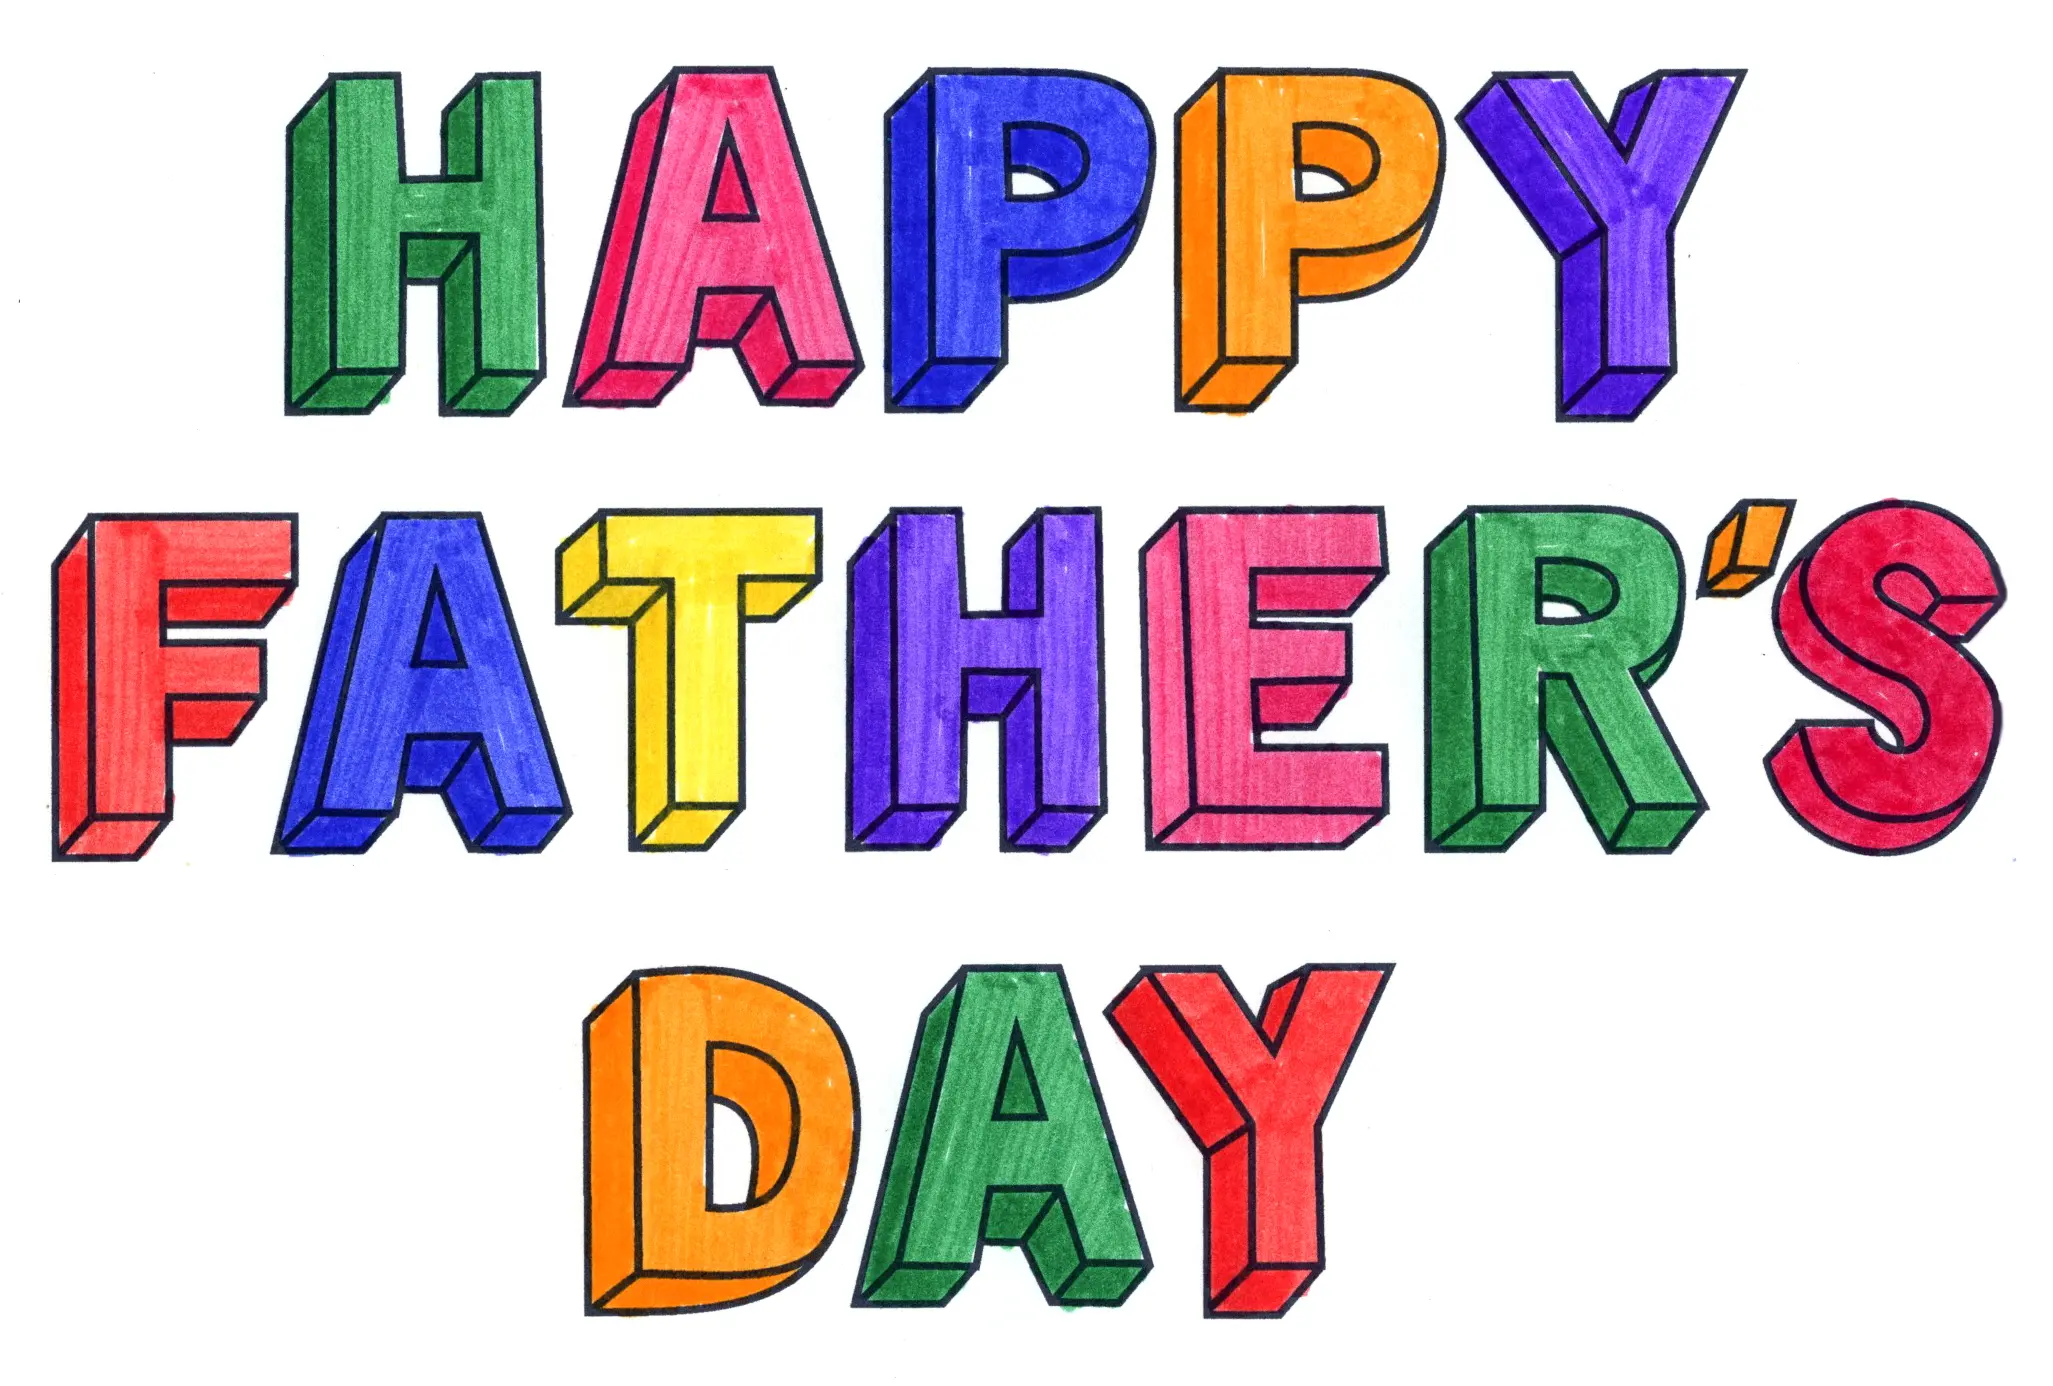 Fathers day drawing card Royalty Free Vector Image-saigonsouth.com.vn